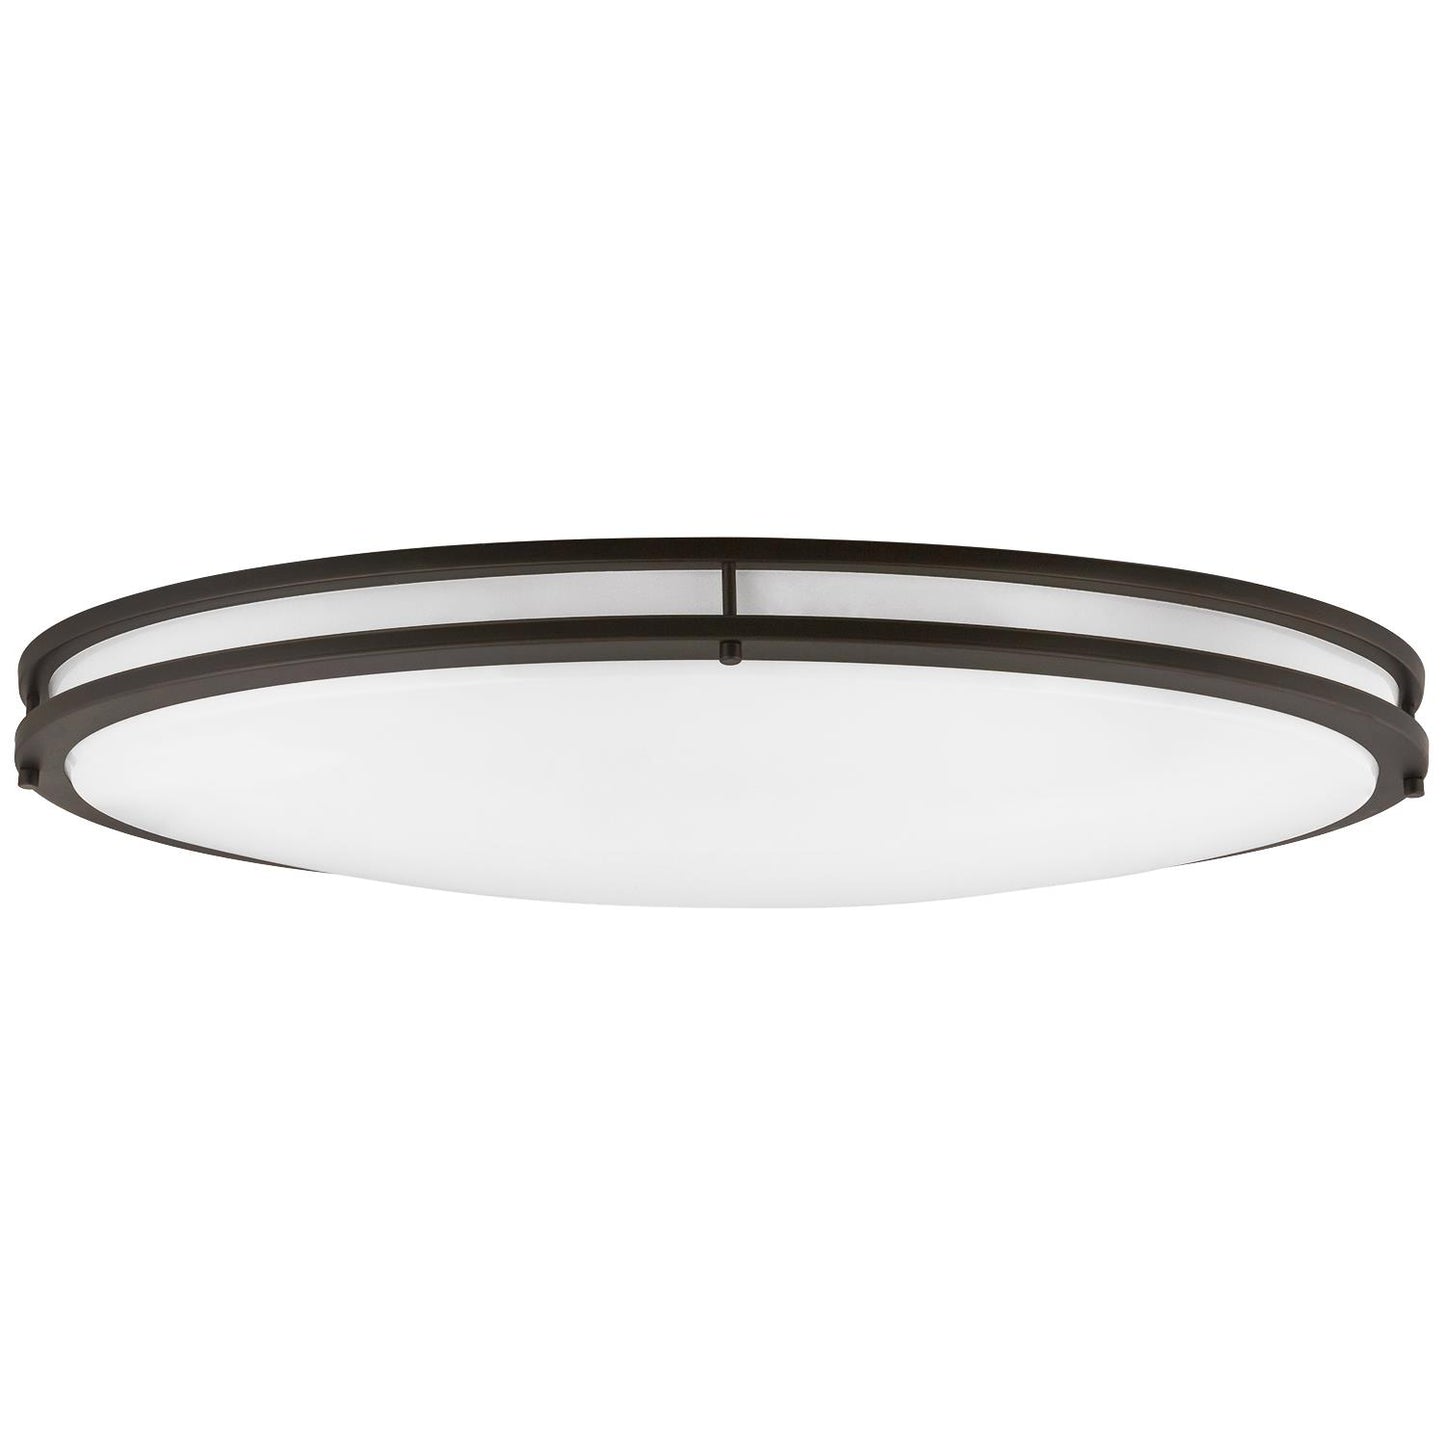 Sunlite 49103-SU LED 32-Inch Oval Flush Mount Ceiling Light Fixture, 40K - Cool White, Dimmable, 3200 Lumens, 40 Watts, Bronze